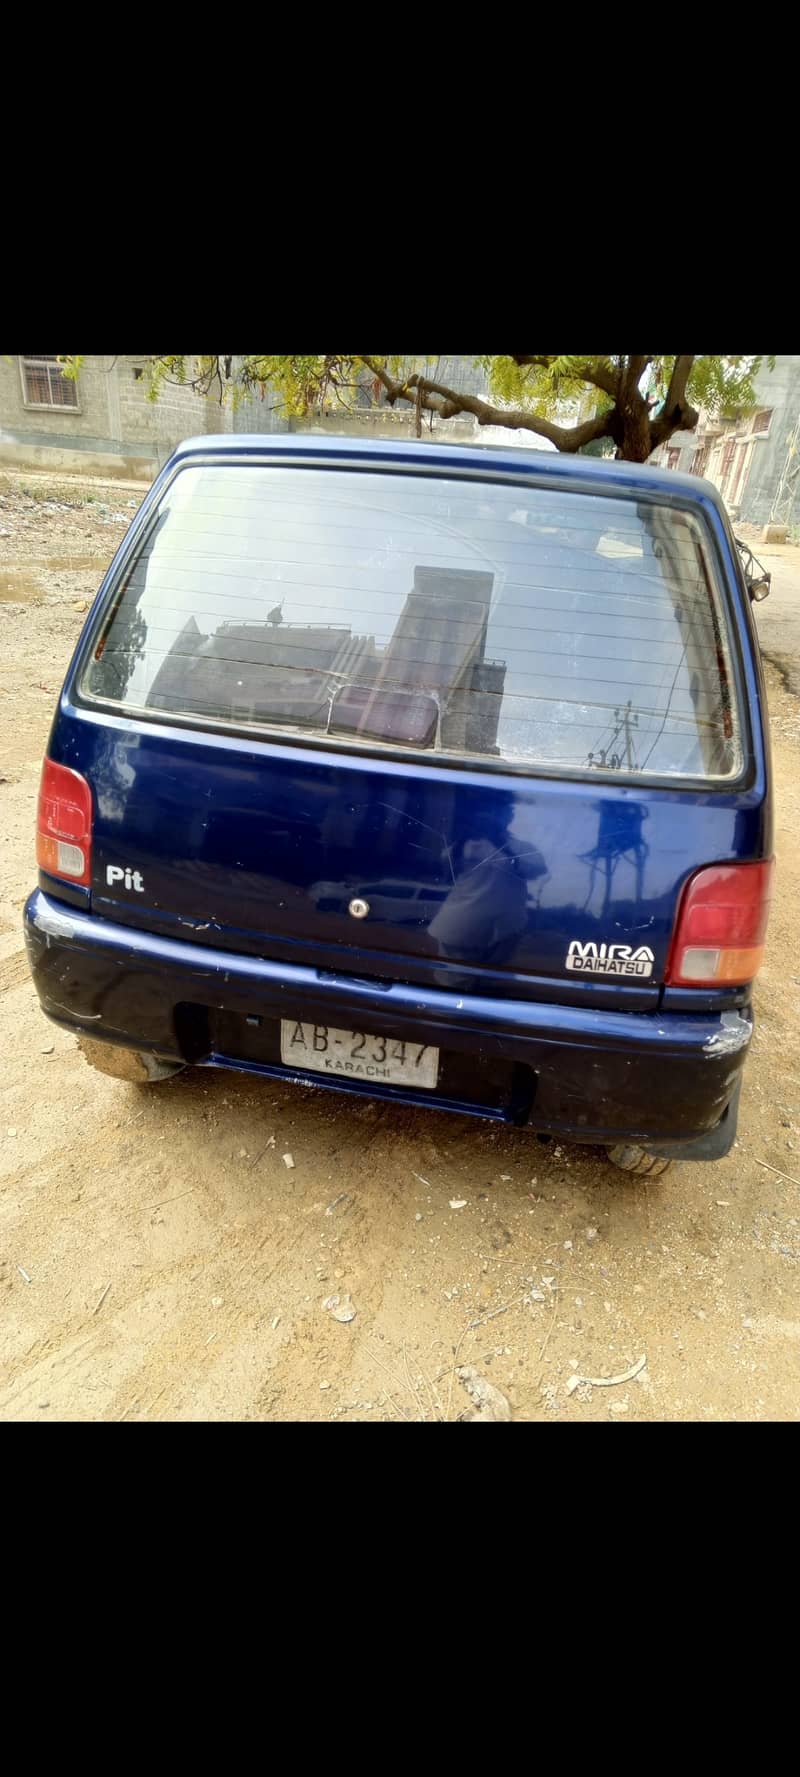 Mira car for sale 93 model cplc clear 8